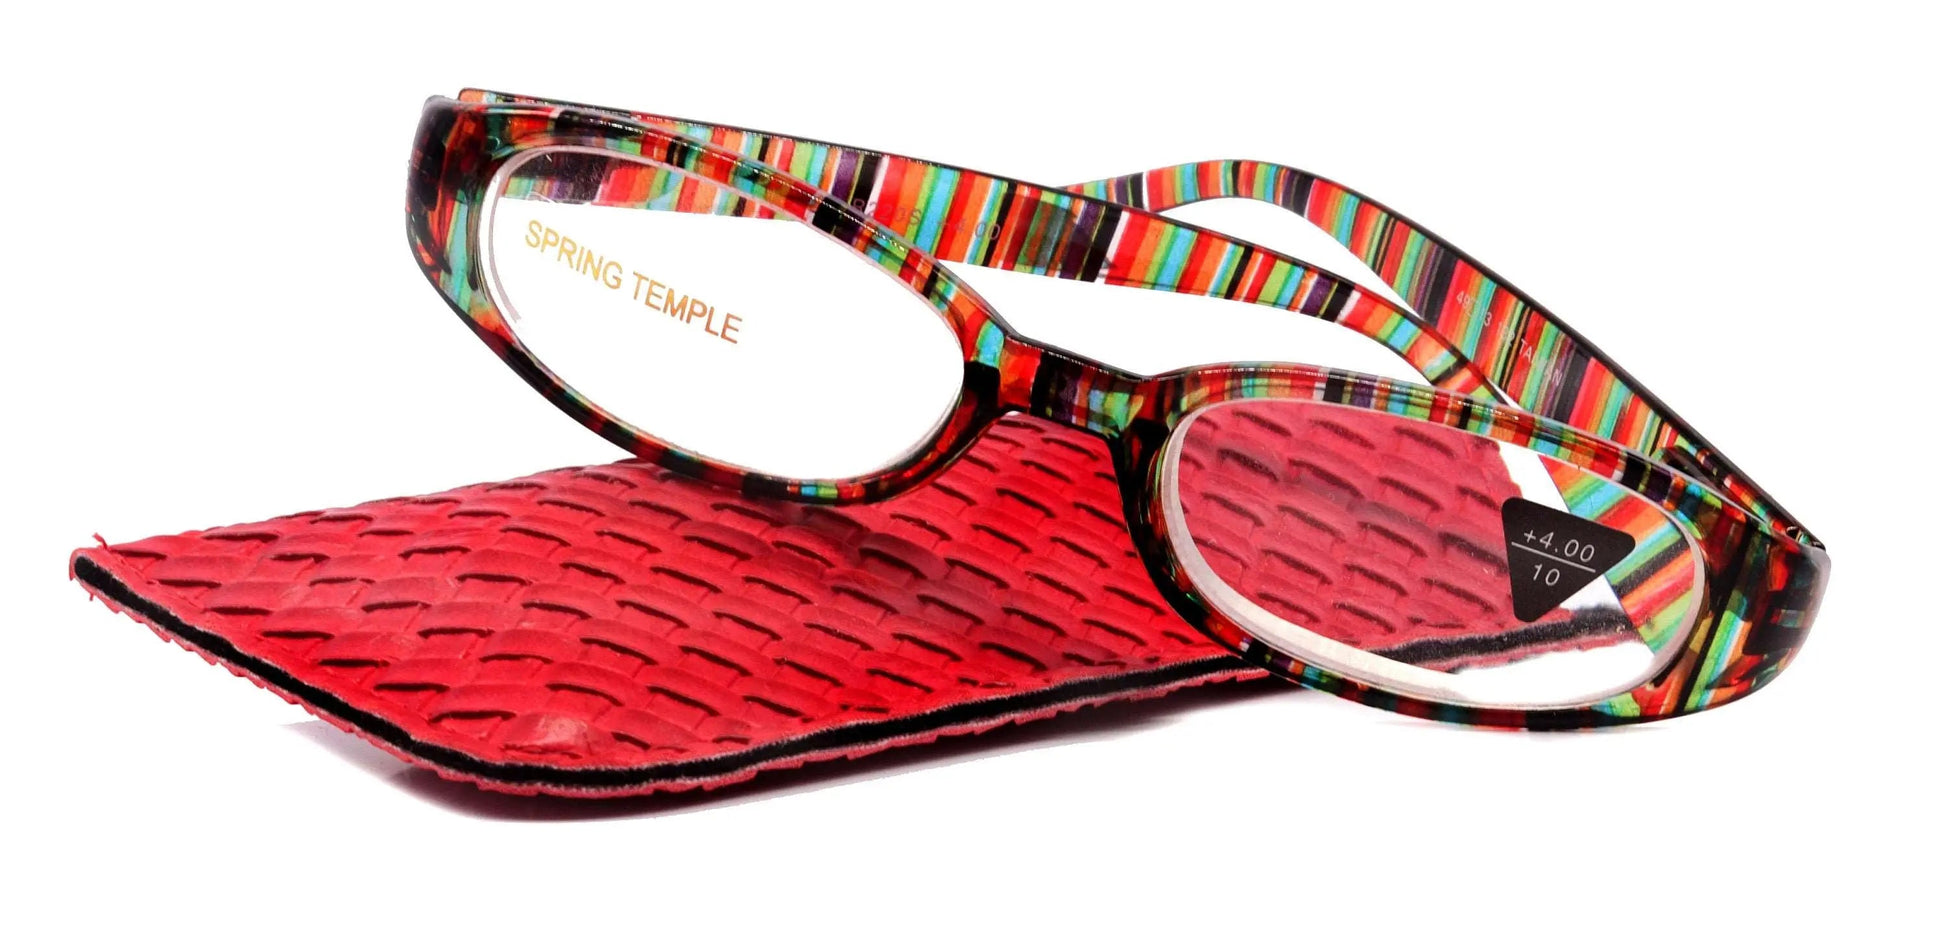 Isabella, (Premium) Reading Glasses, Fashion Reader (Orange Green n Brown) +1.25 +6. Oval, High Magnification, NY Fifth Avenue (Wide Frame)